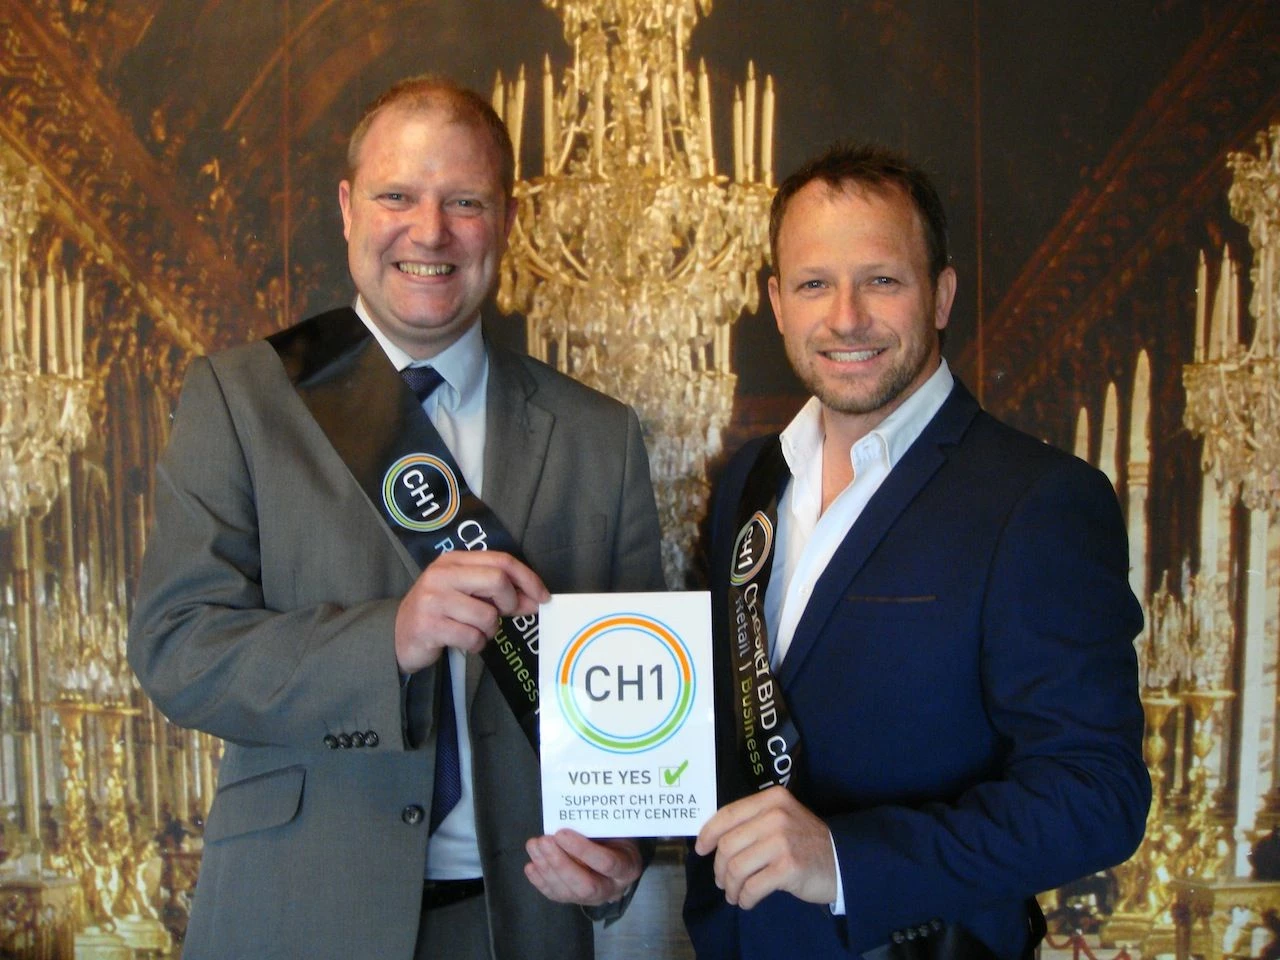 Paul Daniels, Chairman of the CH1ChesterBID Company and Lenny Cunningham, General Manager at Cruise 